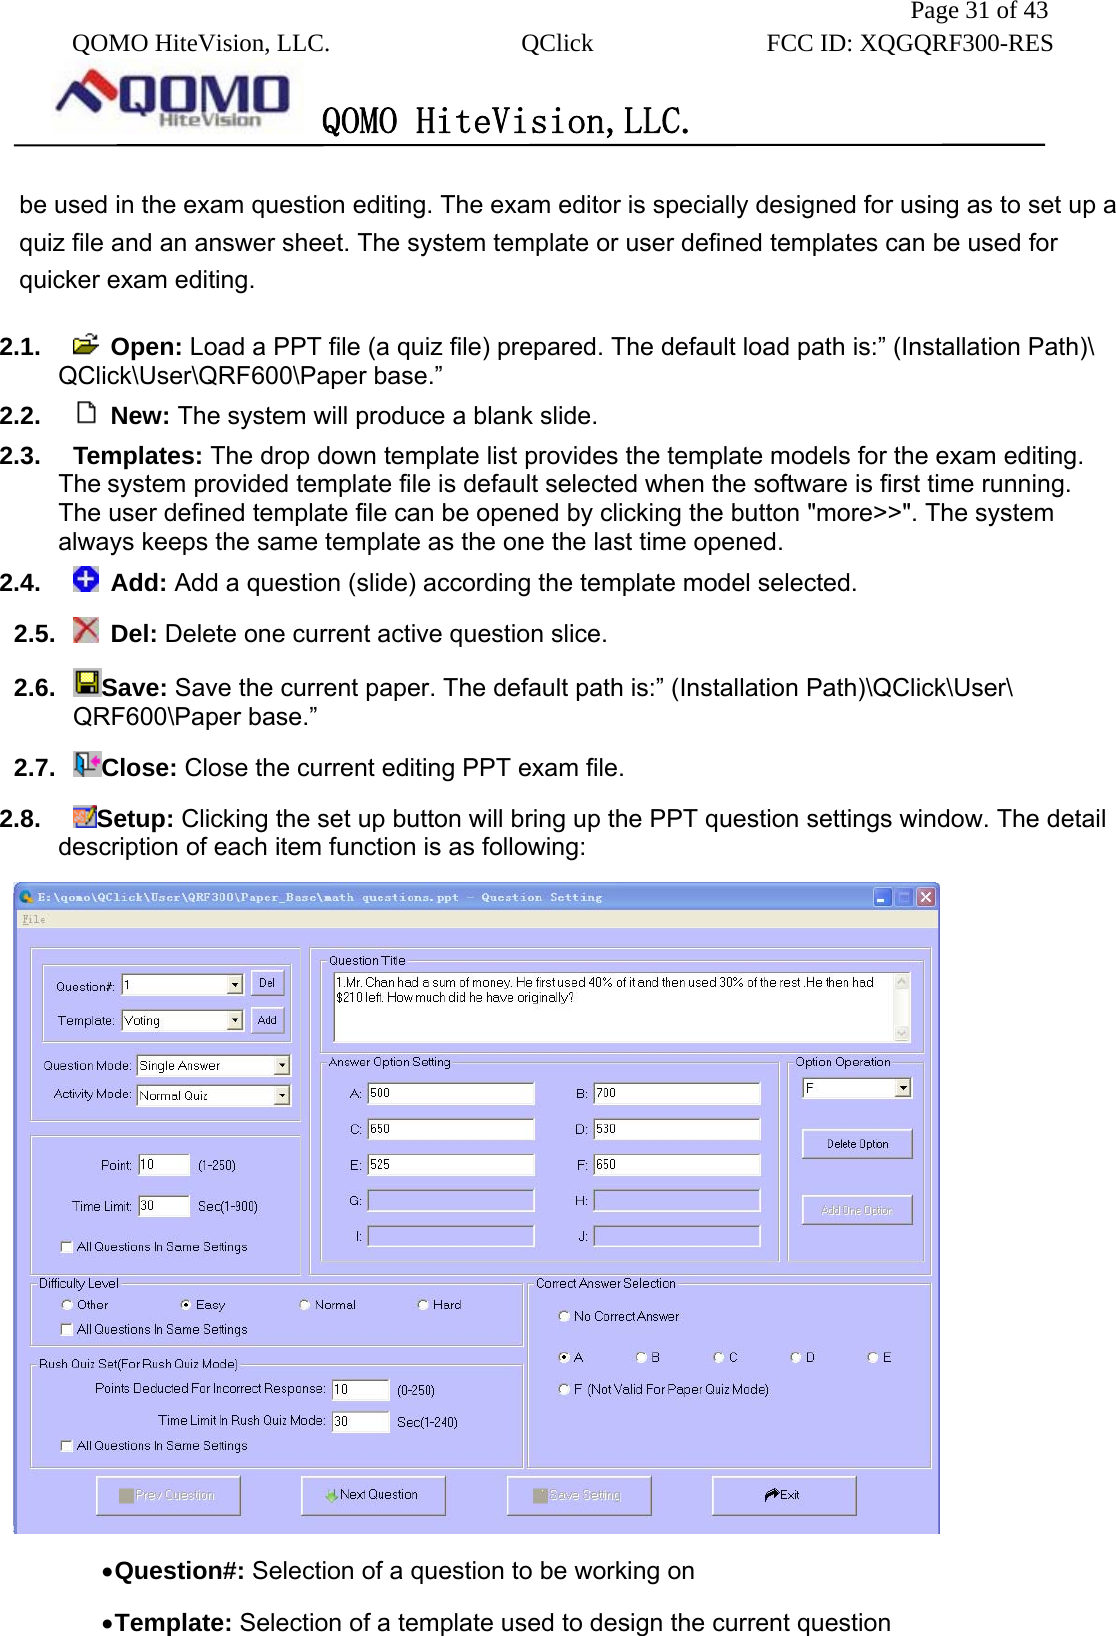               Page 31 of 43  QOMO HiteVision, LLC.  QClick        FCC ID: XQGQRF300-RES      QOMO HiteVision,LLC.   be used in the exam question editing. The exam editor is specially designed for using as to set up a quiz file and an answer sheet. The system template or user defined templates can be used for quicker exam editing.     2.1.   Open: Load a PPT file (a quiz file) prepared. The default load path is:” (Installation Path)\ QClick\User\QRF600\Paper base.”     2.2.   New: The system will produce a blank slide. 2.3. Templates: The drop down template list provides the template models for the exam editing. The system provided template file is default selected when the software is first time running. The user defined template file can be opened by clicking the button &quot;more&gt;&gt;&quot;. The system always keeps the same template as the one the last time opened.   2.4.   Add: Add a question (slide) according the template model selected. 2.5.   Del: Delete one current active question slice. 2.6.  Save: Save the current paper. The default path is:” (Installation Path)\QClick\User\ QRF600\Paper base.” 2.7.  Close: Close the current editing PPT exam file. 2.8.  Setup: Clicking the set up button will bring up the PPT question settings window. The detail description of each item function is as following:    • Question#: Selection of a question to be working on • Template: Selection of a template used to design the current question 